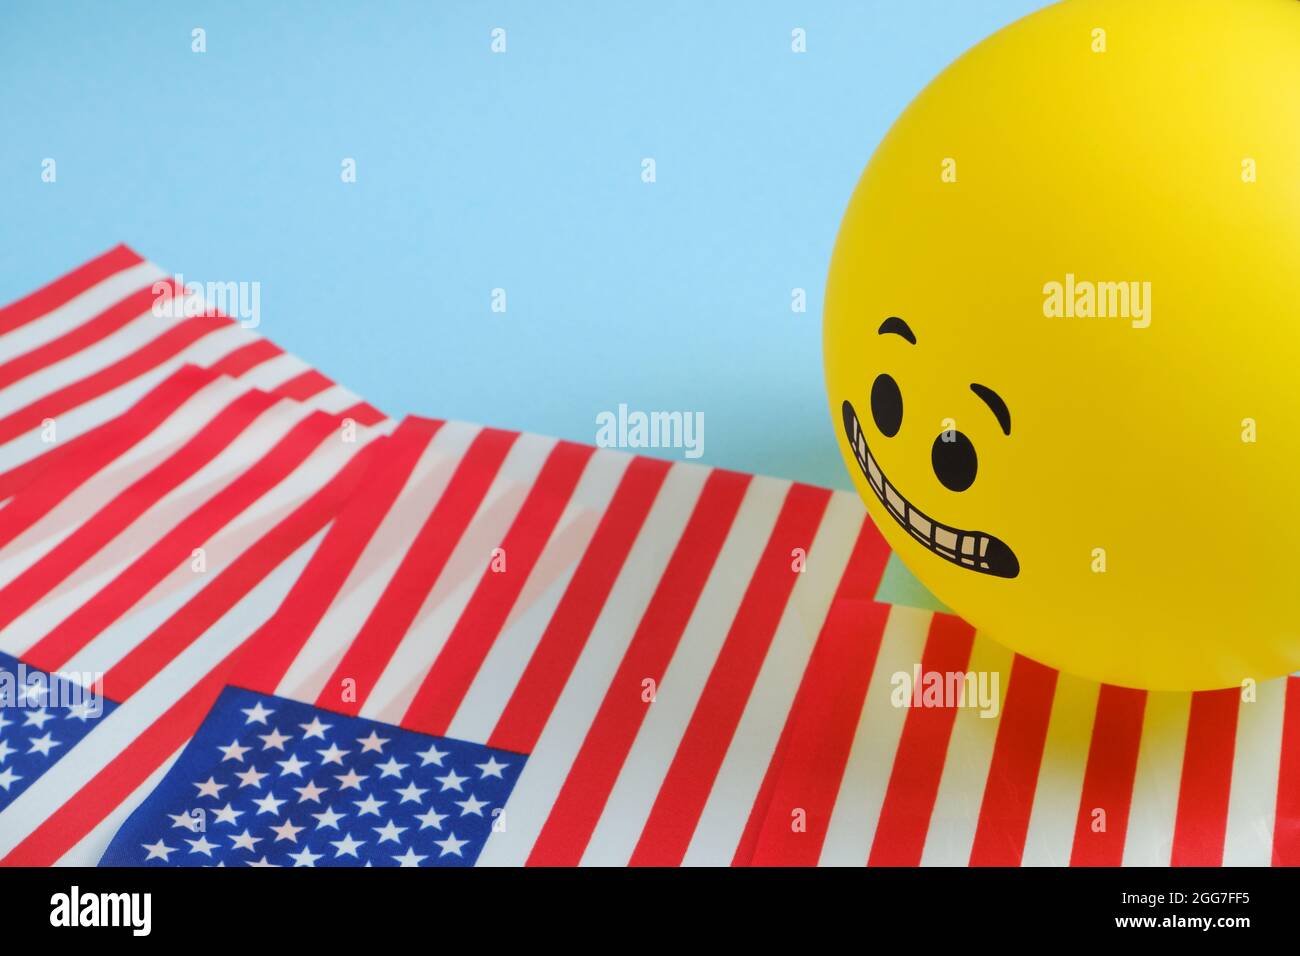 Yellow emoji balloons with American flags on a blue background. Stock Photo